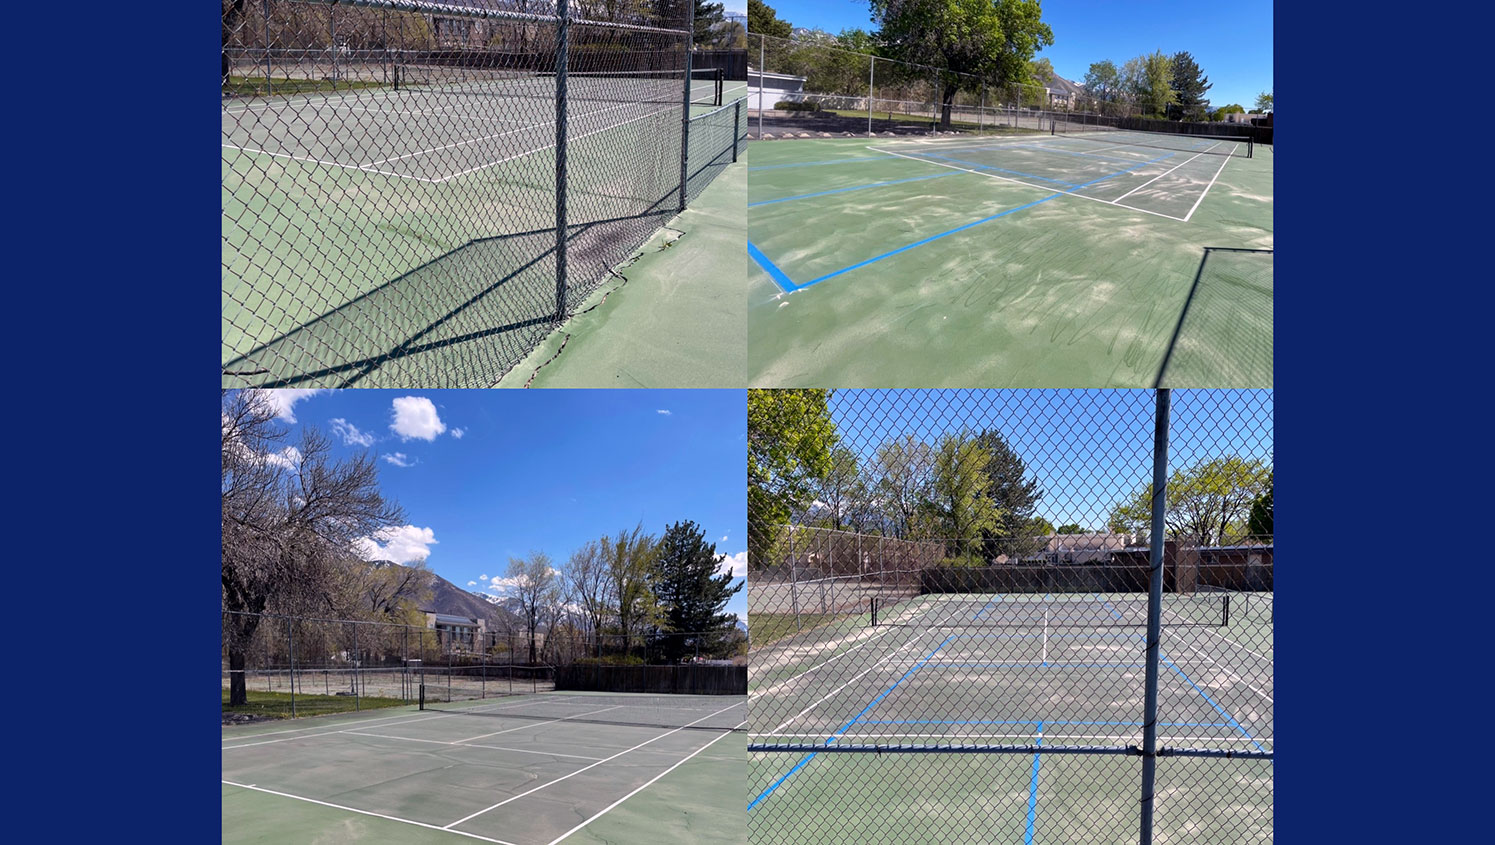 Indica Email schrijven Sanctie Pickleball Court Striping Project | G-FORCE™ Salt Lake City